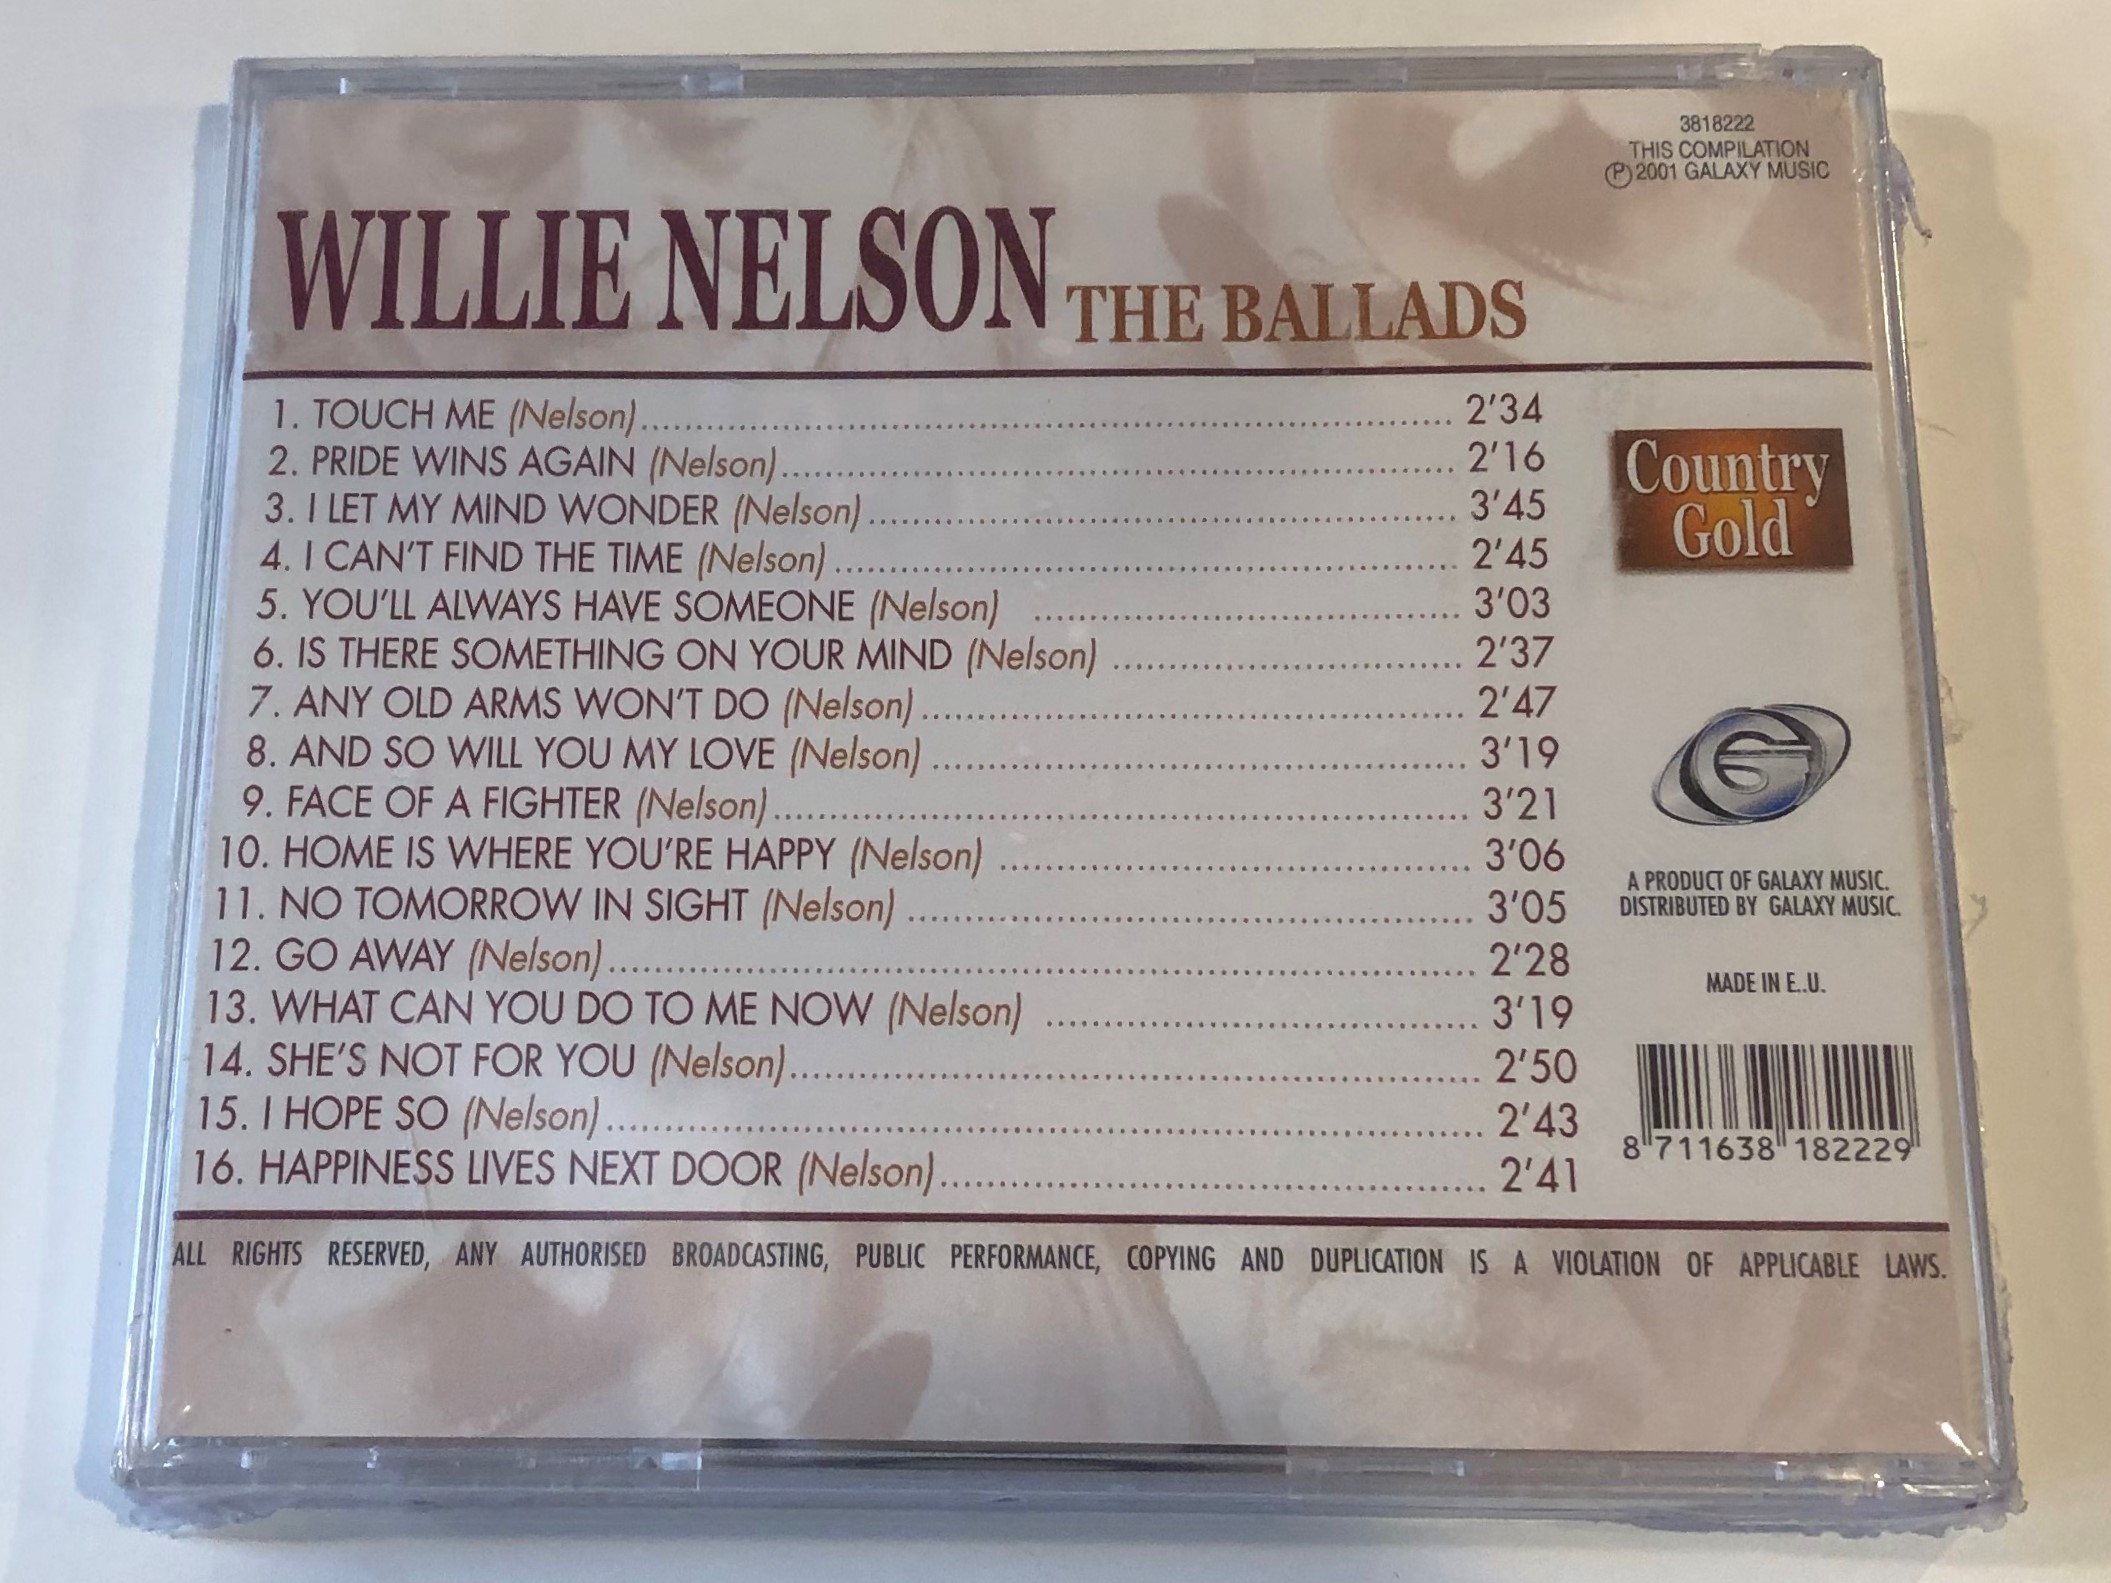 willie-neslom-country-gold-the-ballads-i-let-my-mind-wonder-pride-wins-again-i-can-t-find-the-time-no-tomorrow-in-sight-go-away-and-so-will-you-my-love-and-many-more...-galaxy-music-au.jpg